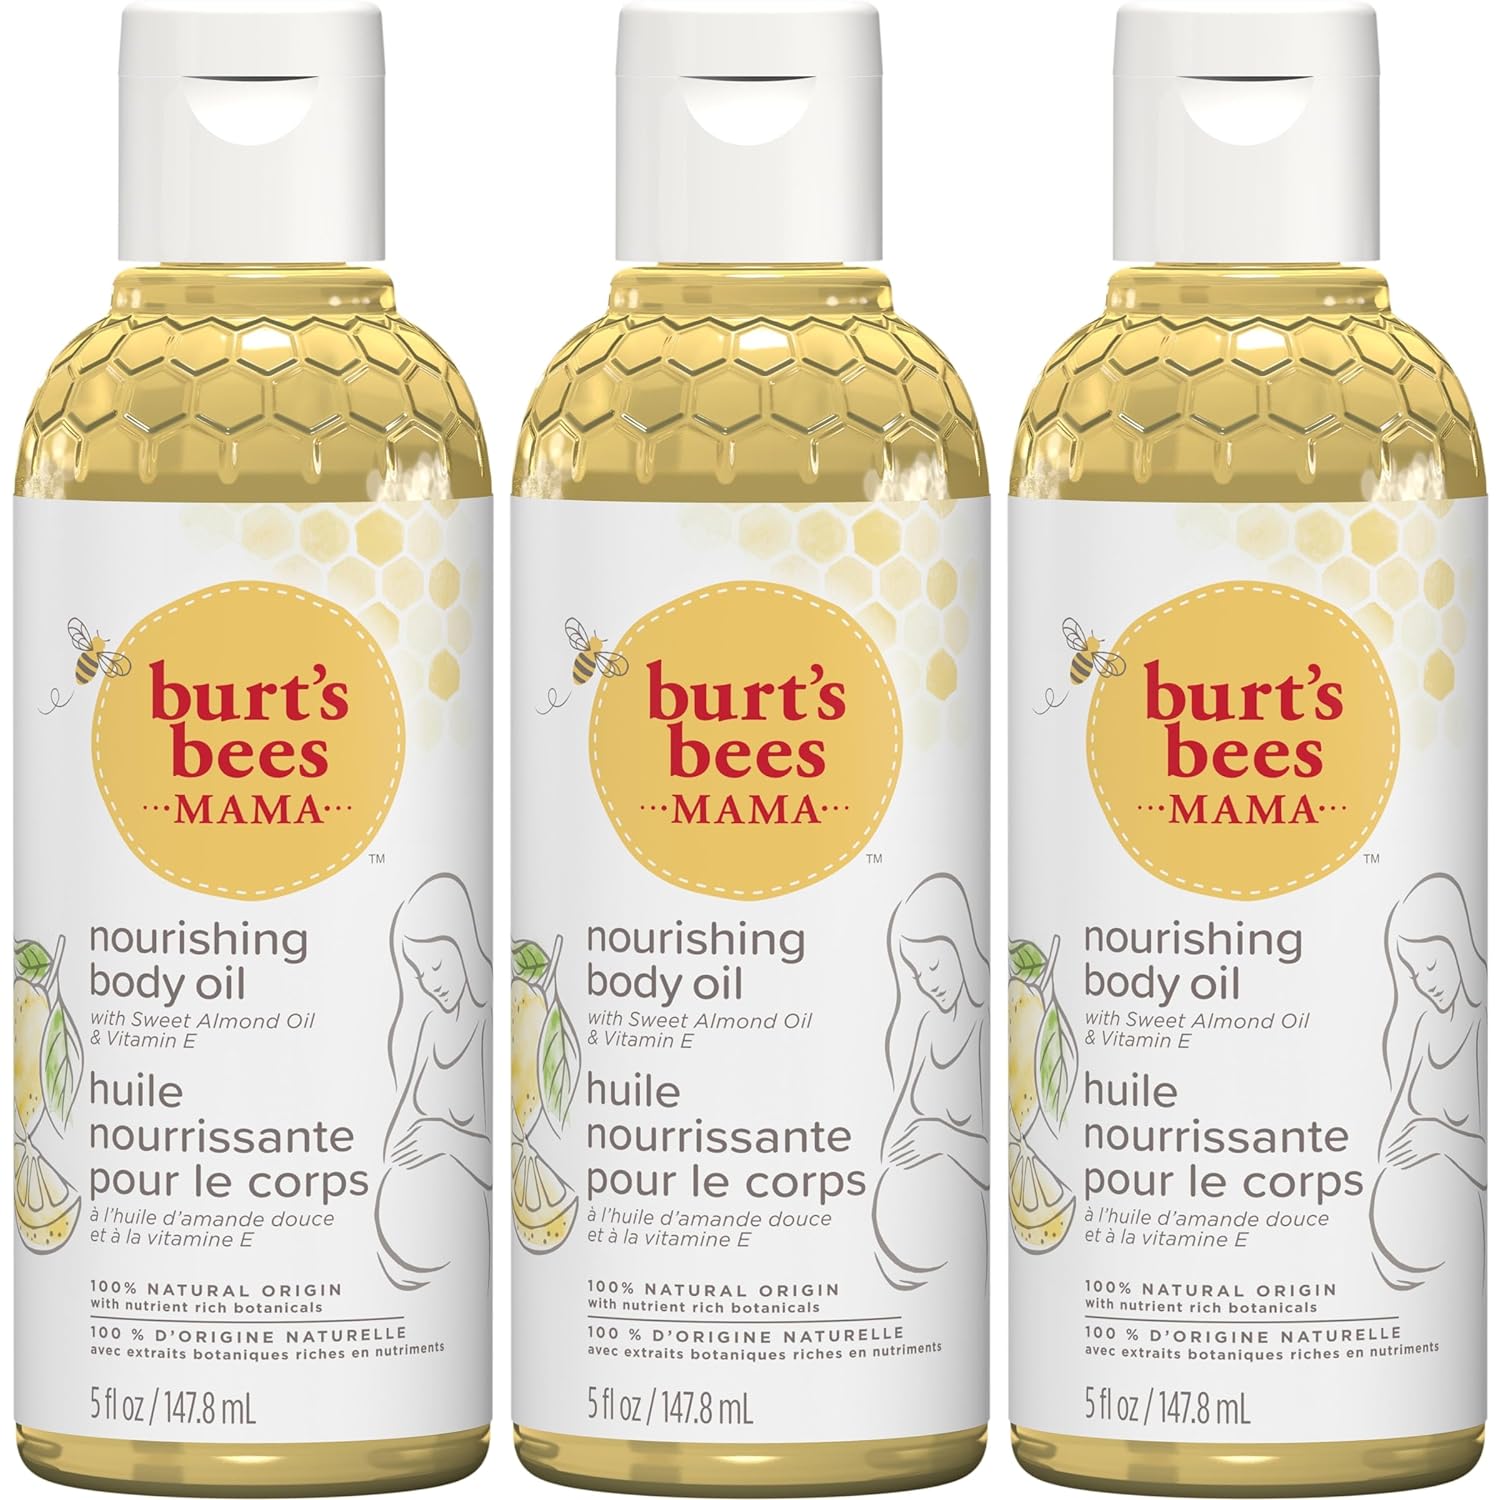 Burt's Bees Mama Body Oil with Vitamin E, 100% Natural Origin, 5 Fluid Ounces(Pack of 3)